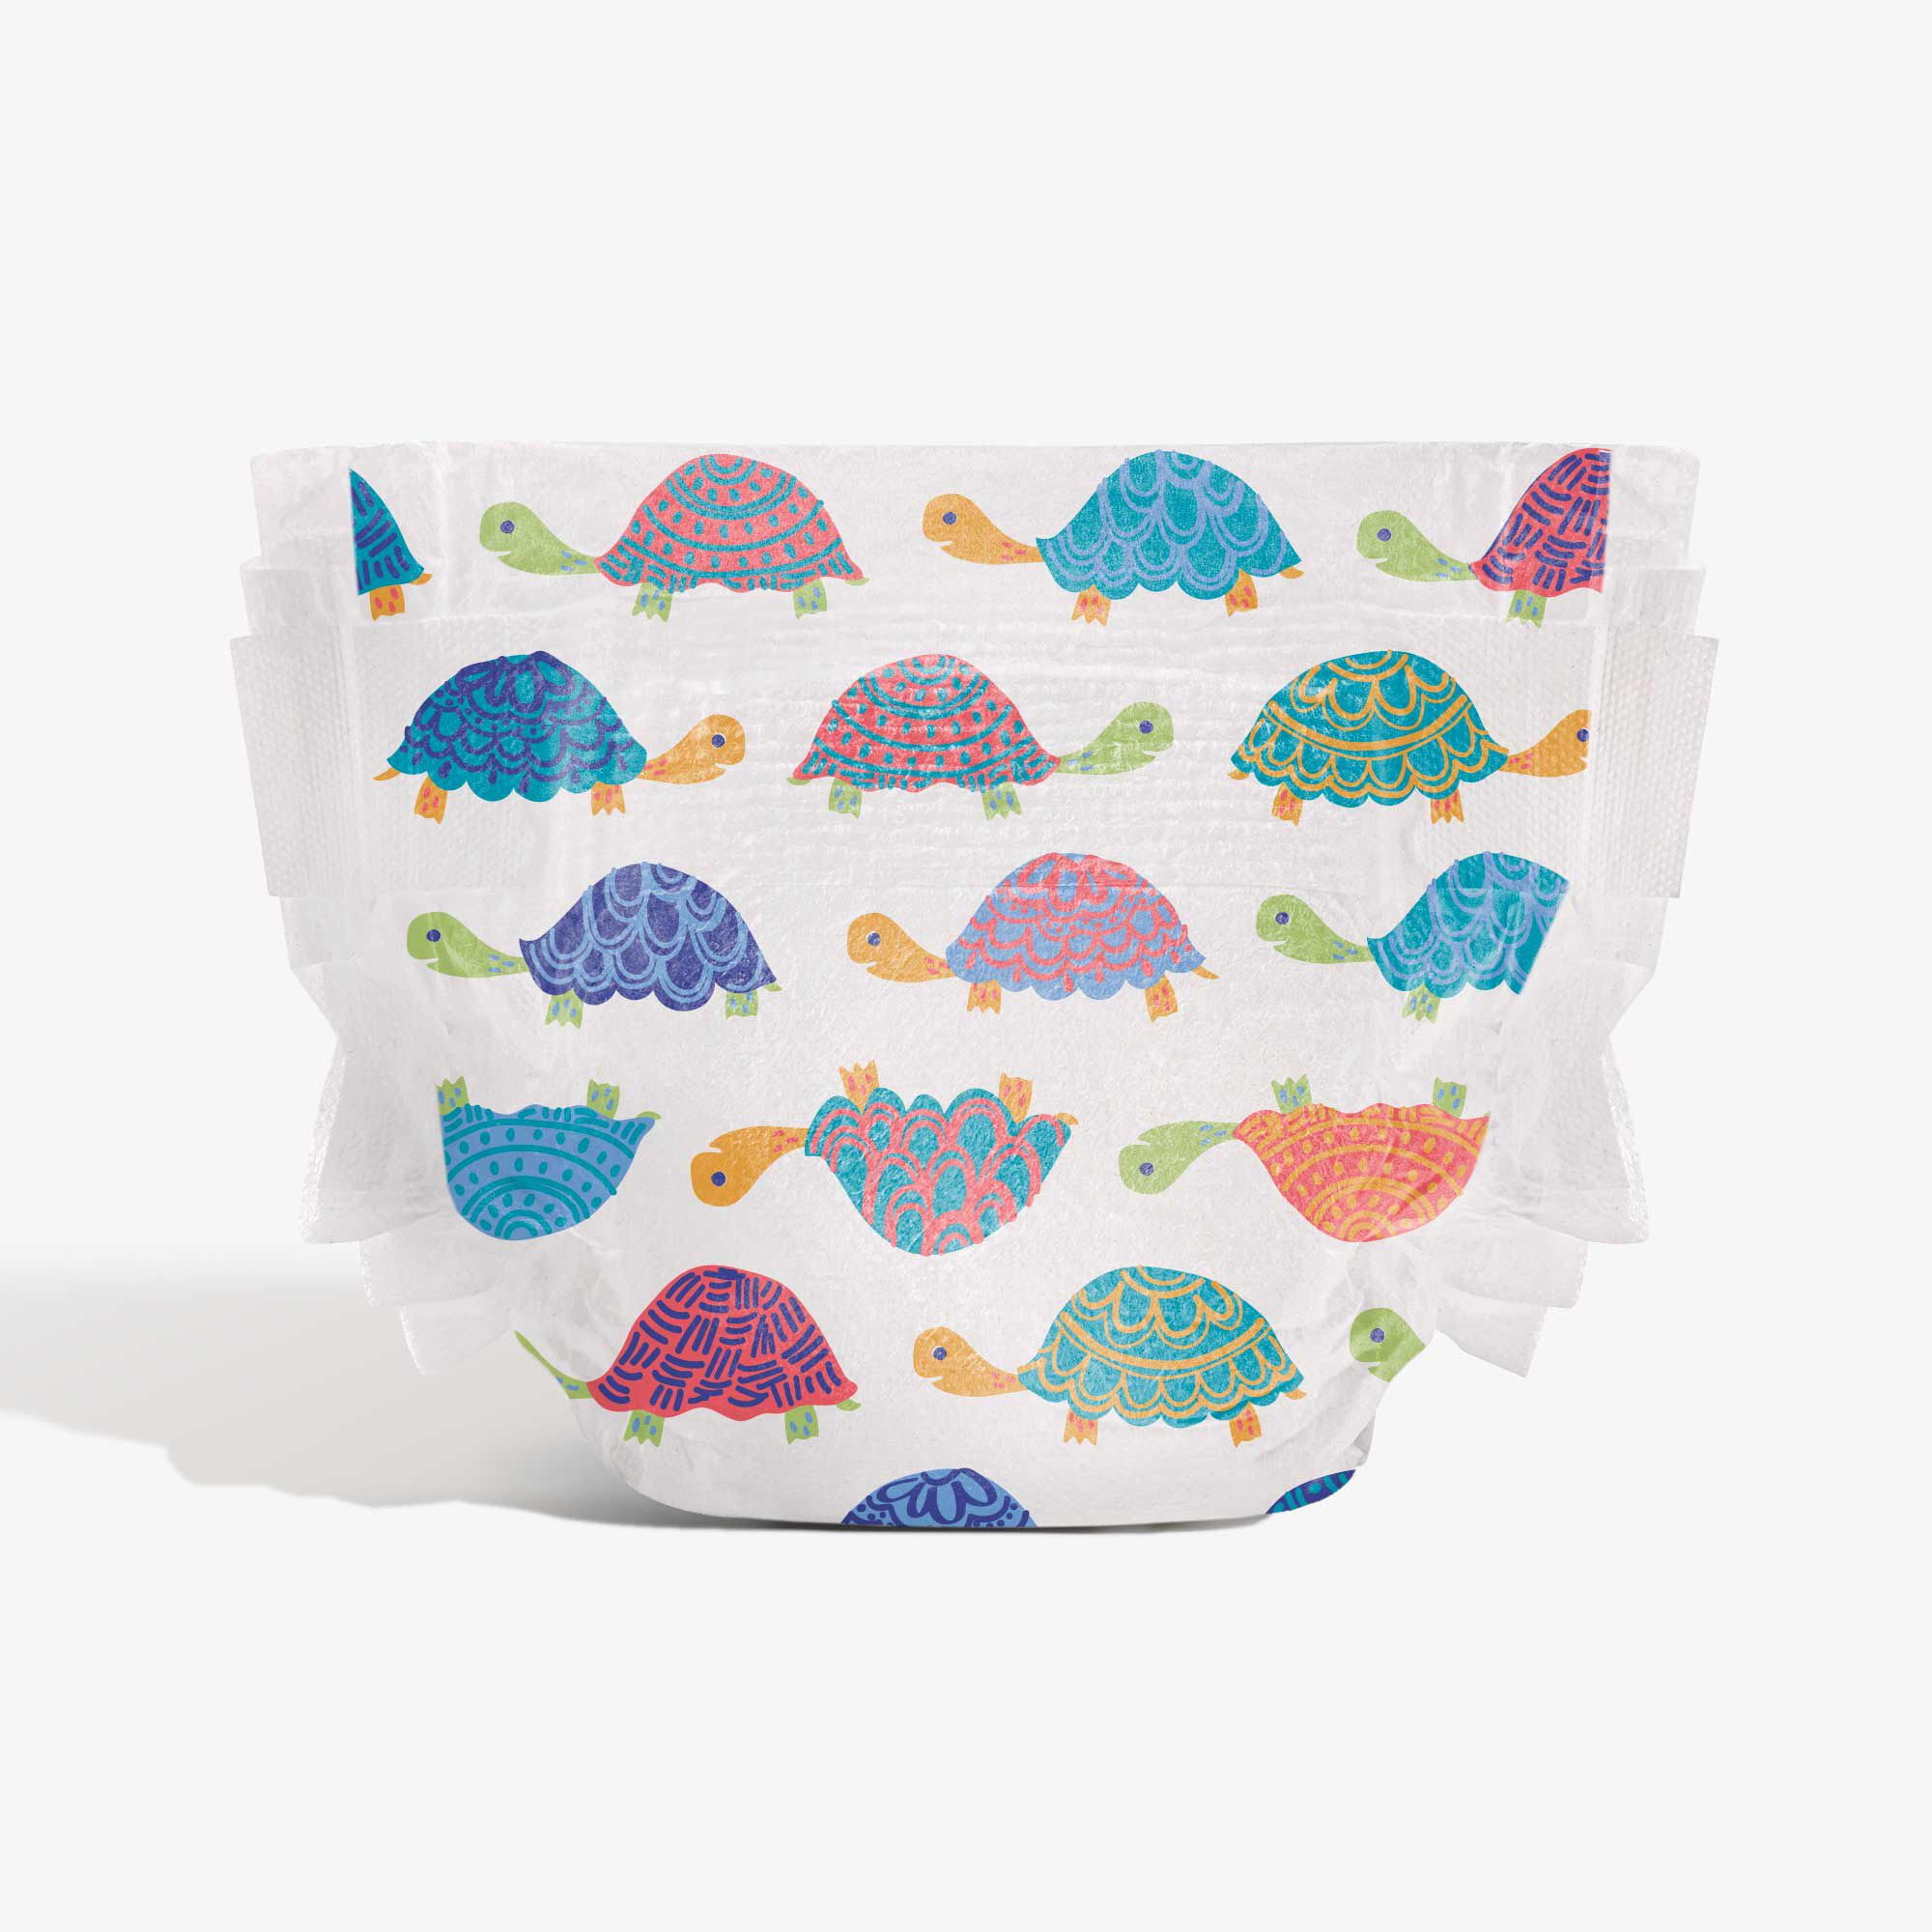 patterned disposable diapers